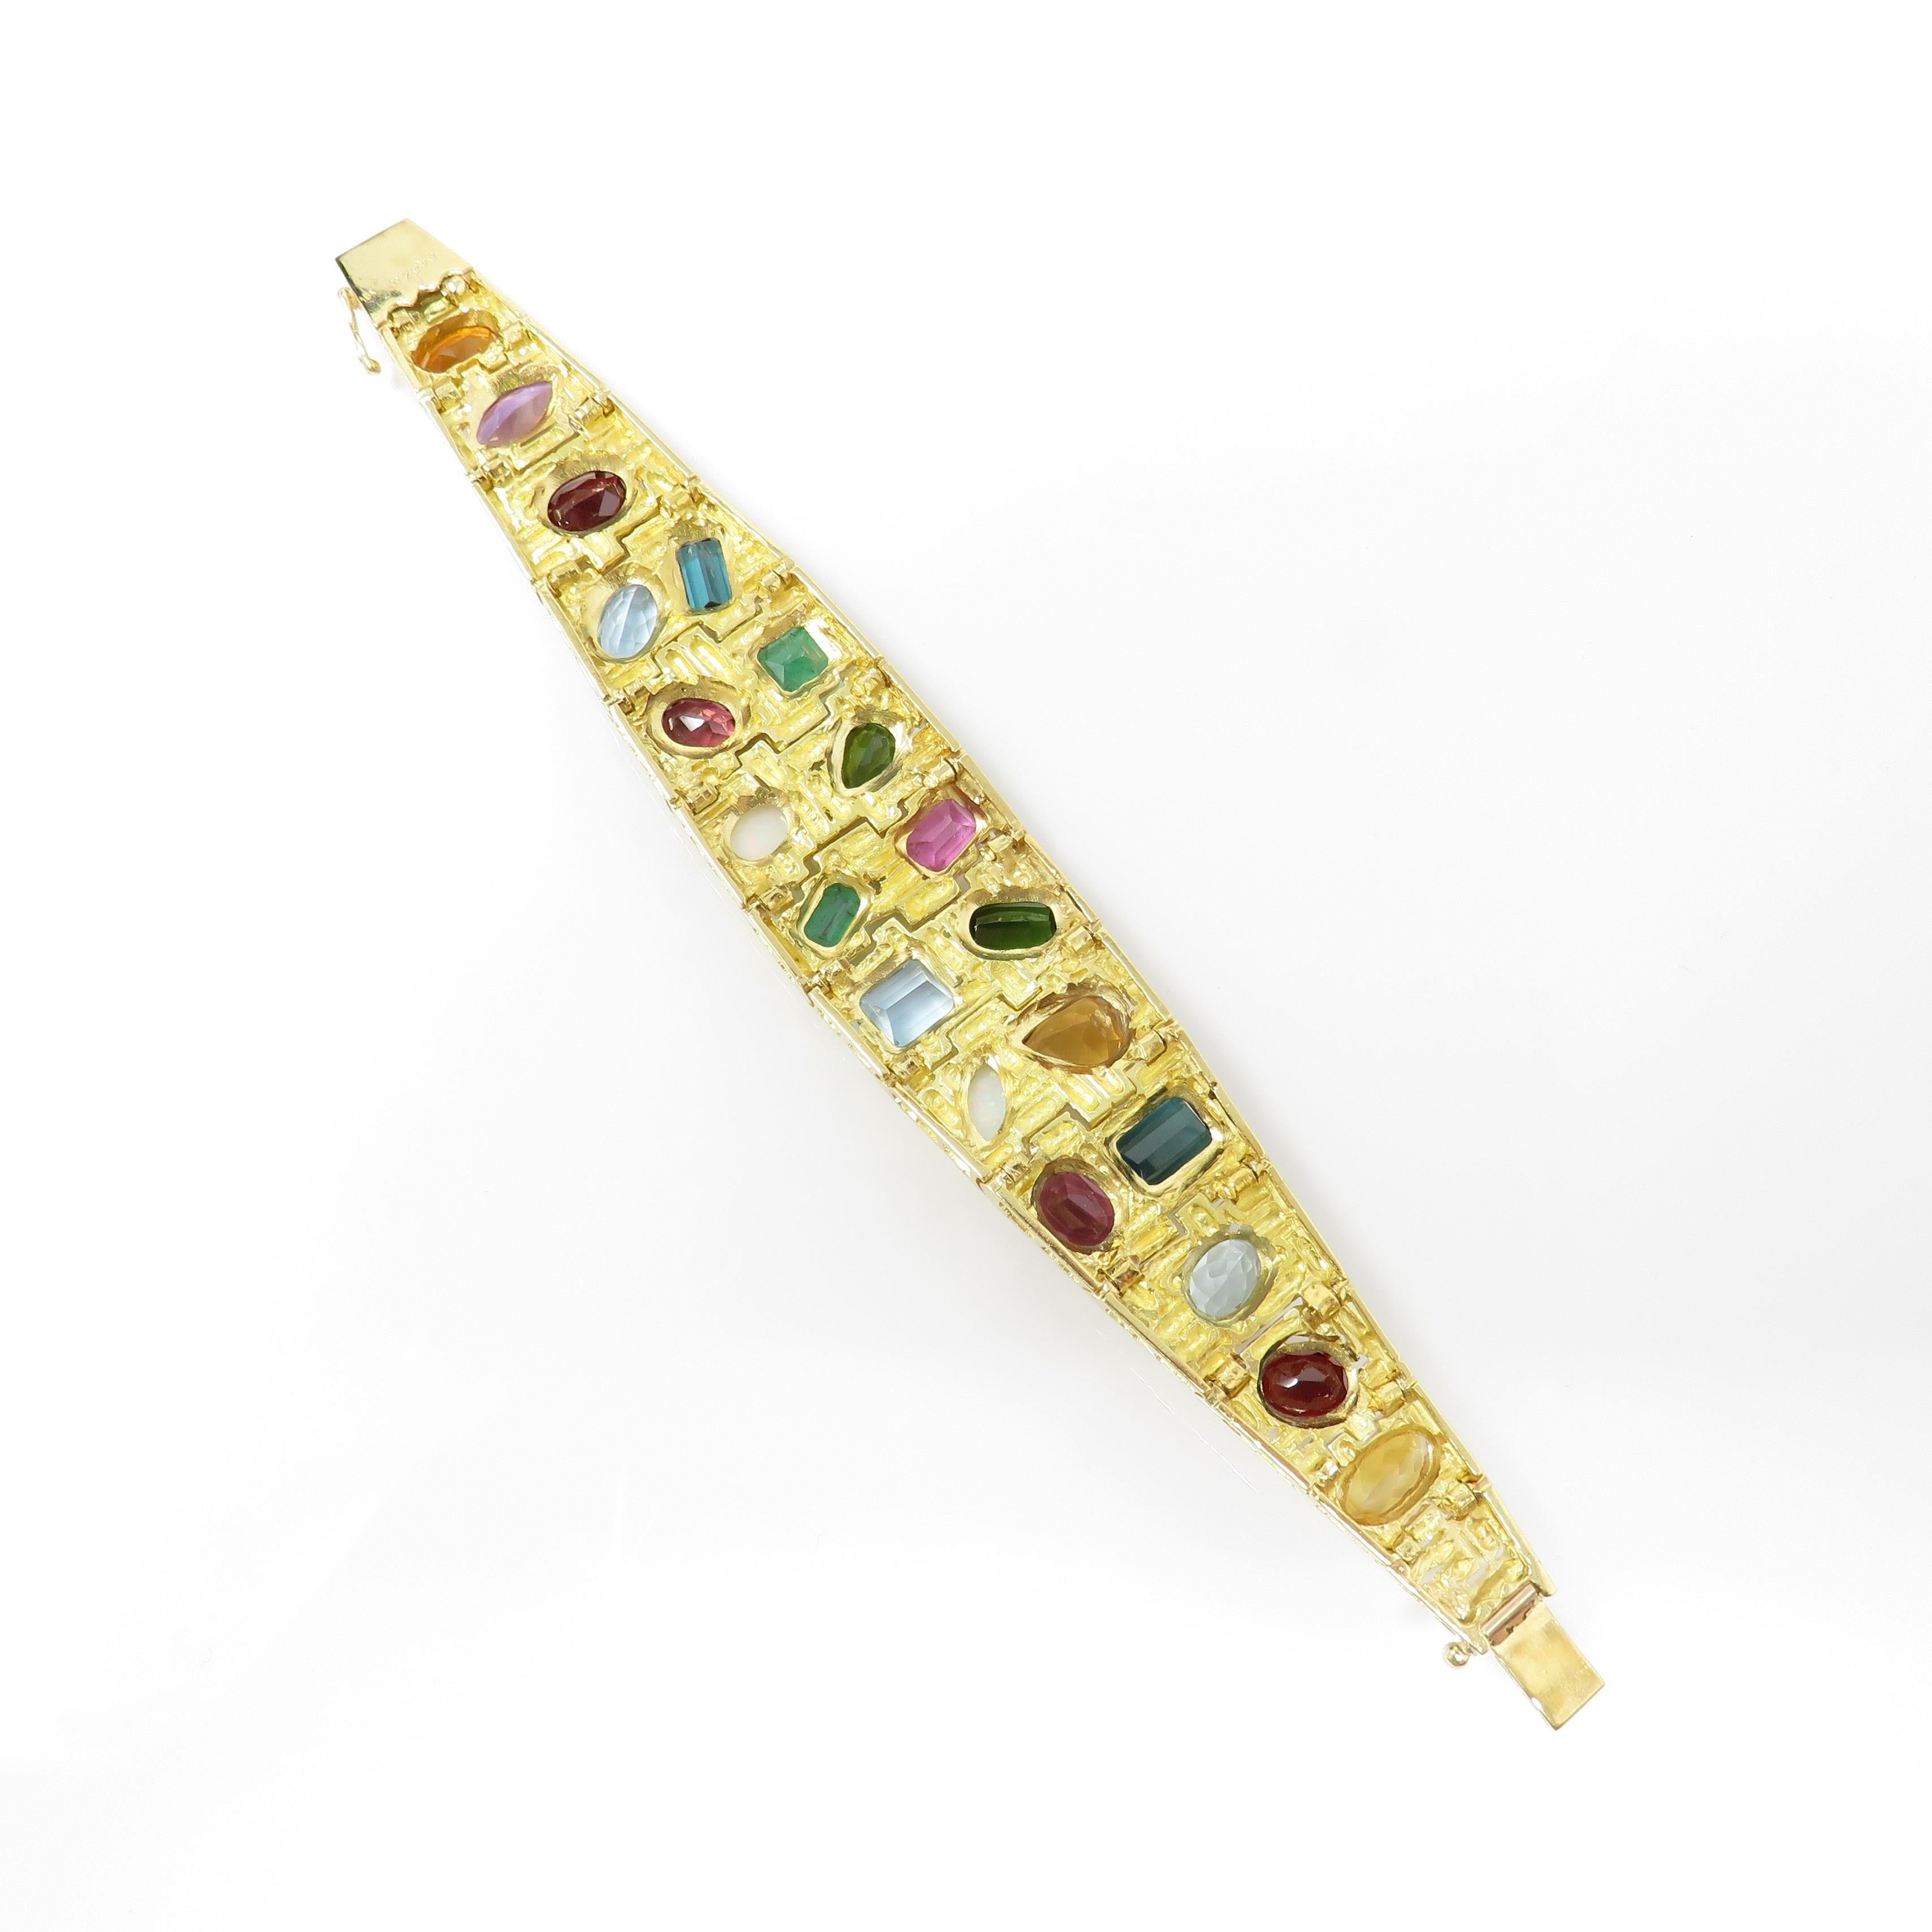 This stunning well made heavy midcentury retro designer bracelet by H. Stern (Brazil) is set in thick heavy 18kt bright yellow gold. The width of the bracelet cuff is 2 1/16 inches to 5/16 inches.  The bracelet is 6.75 inches long (perfect size to